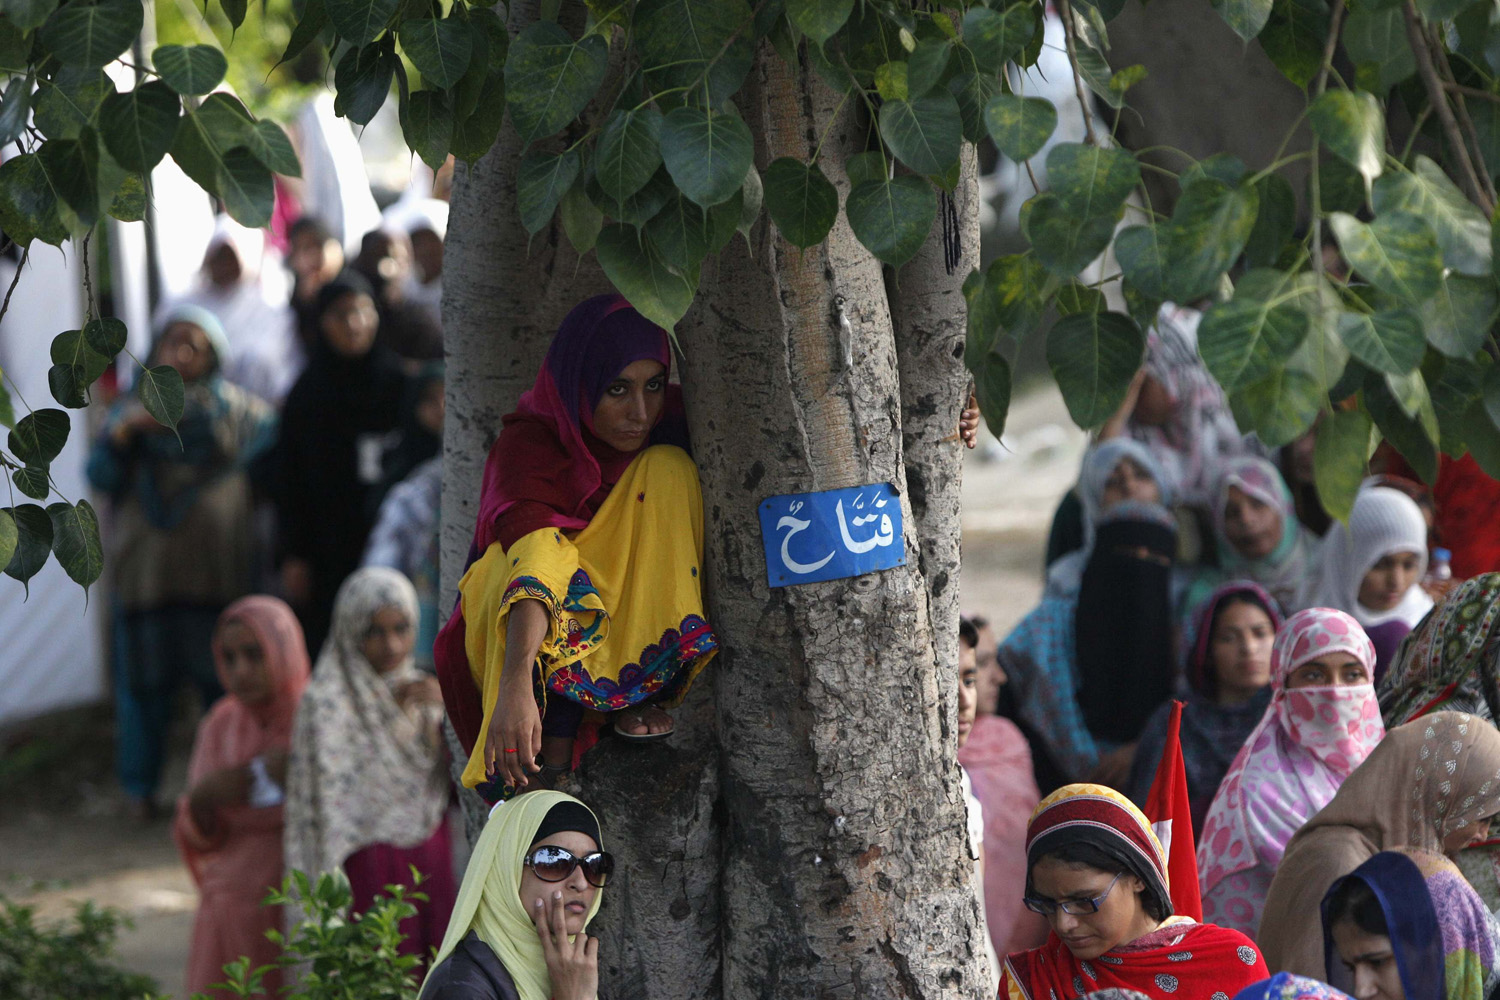 Supporter of Mohammad Tahir ul-Qadri sits on a tree while listening to his speech with others during the Revolution March in Islamabad